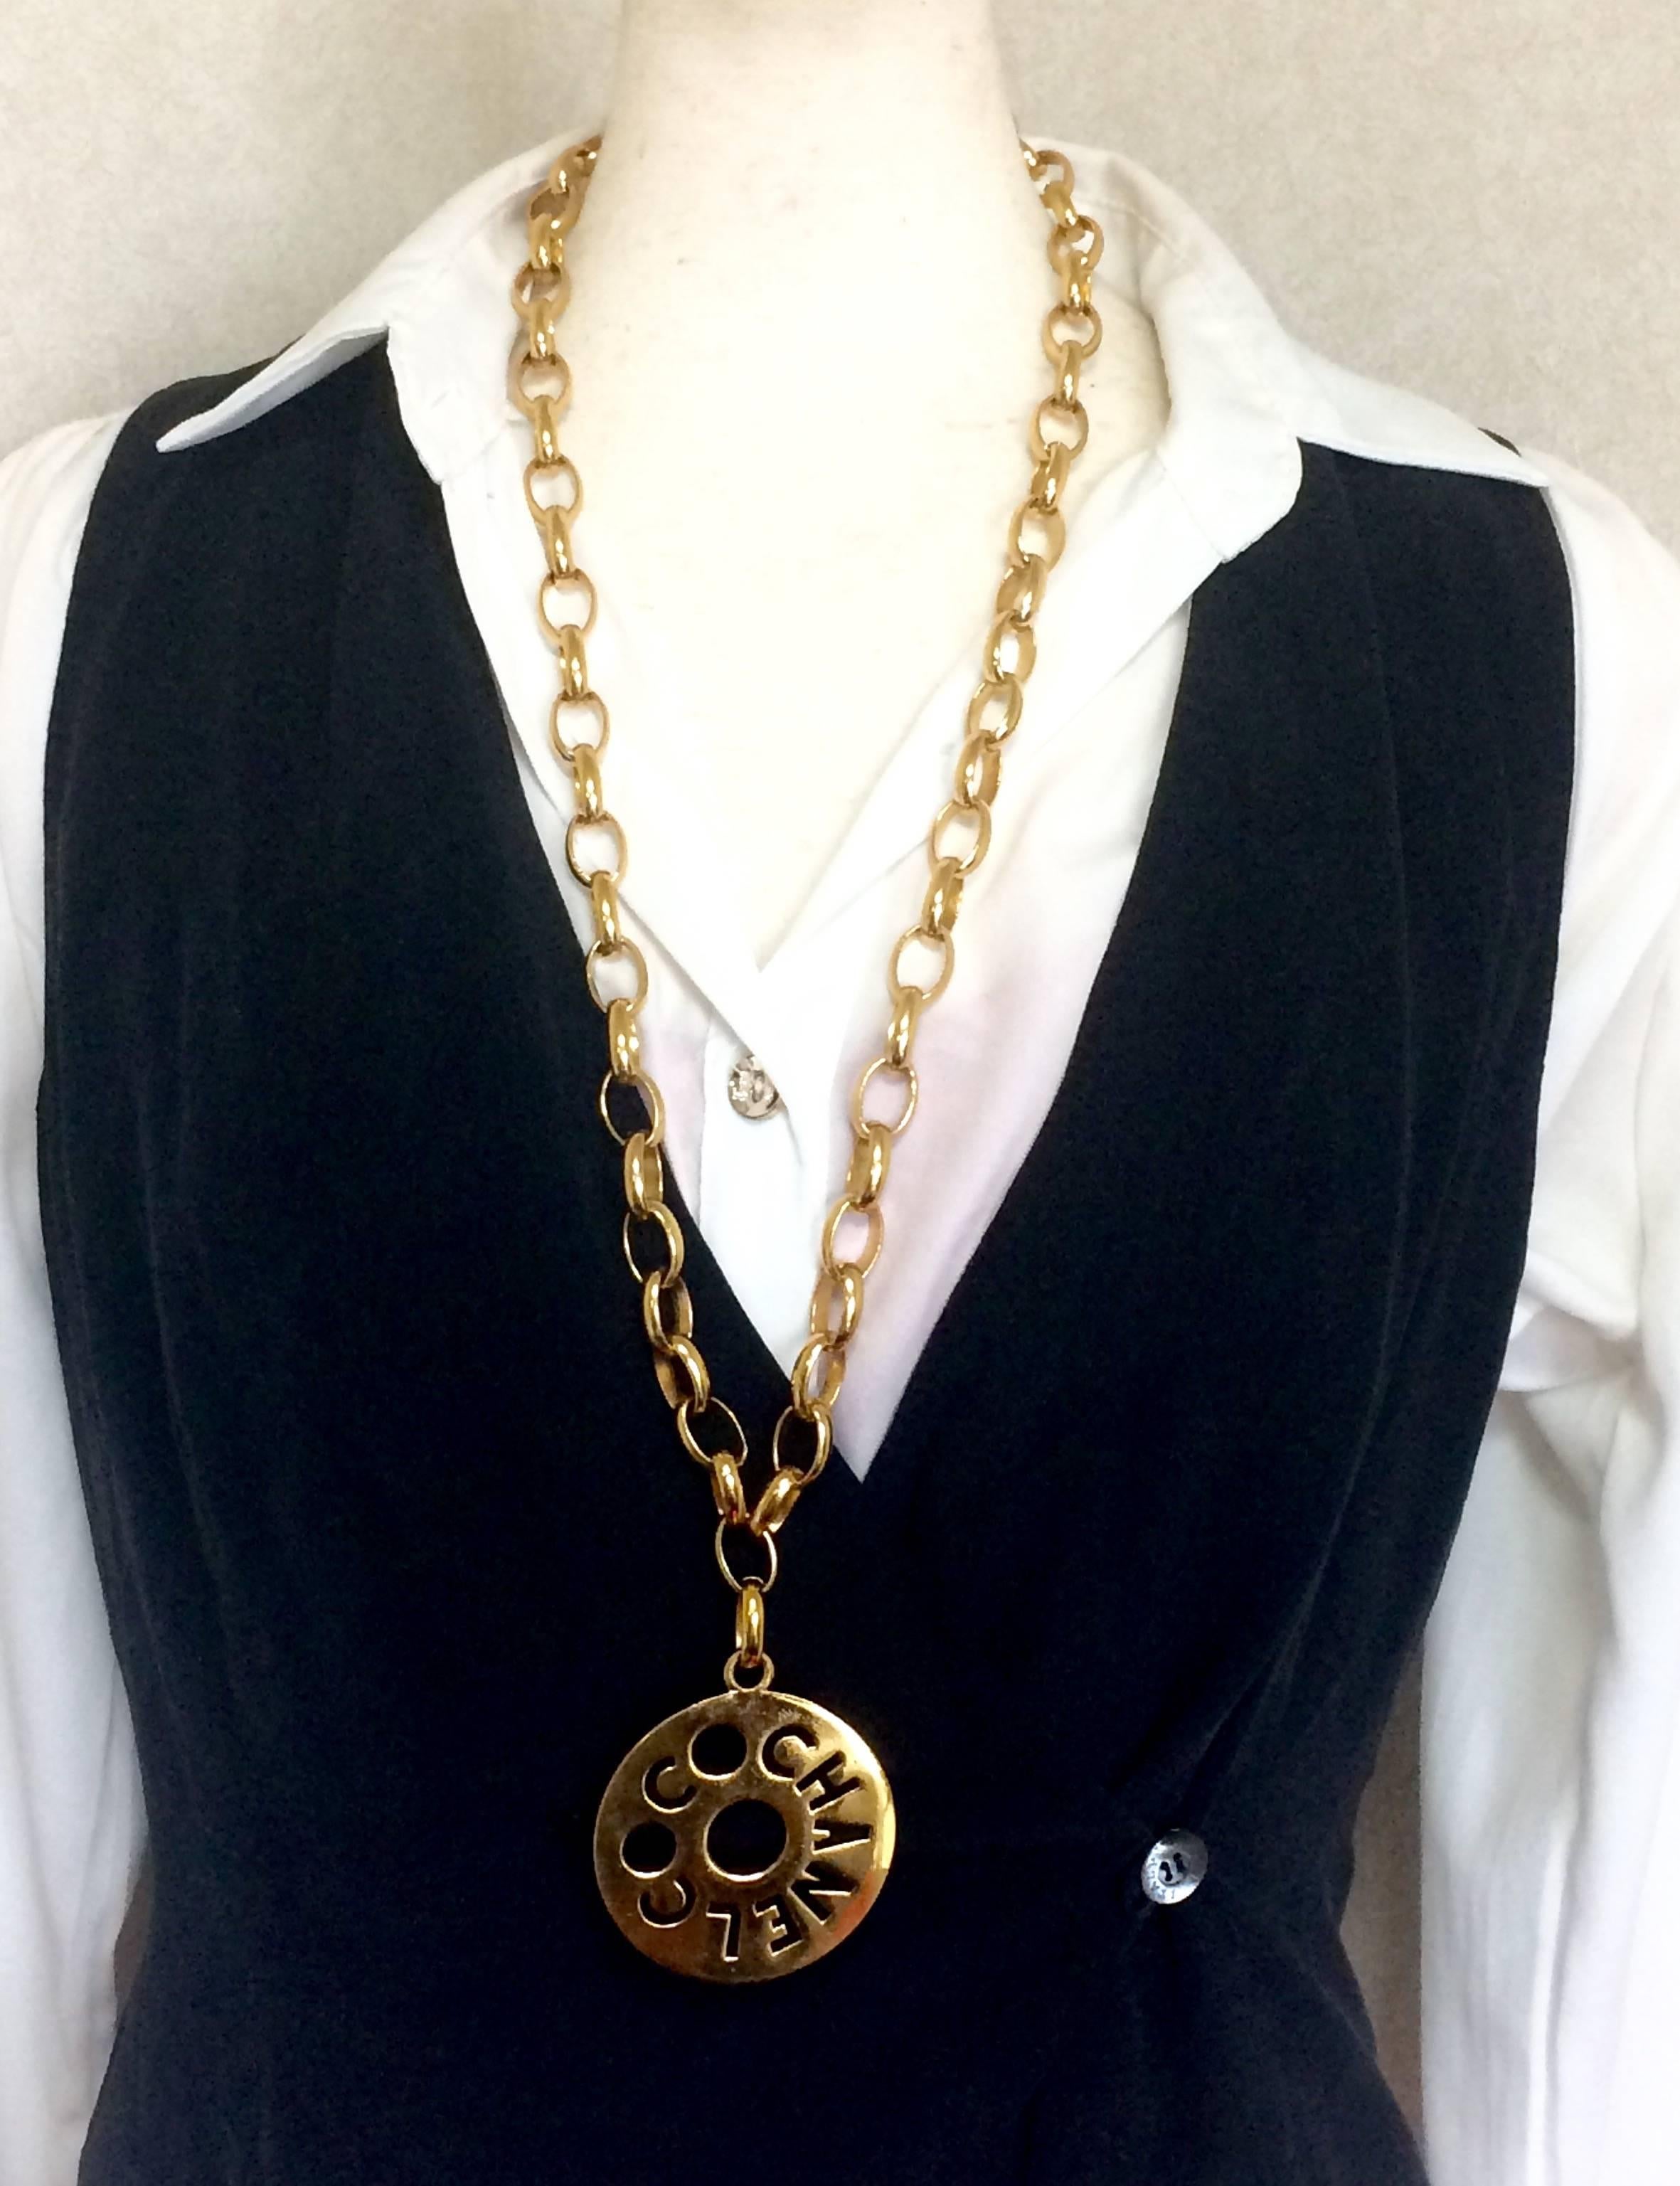 1980s. Vintage CHANEL golden chain necklace, chain belt with round logo COCO cutout pendant top. Rare Chanel mode jewelry from the 80's.

Beautiful vintage condition!
Introducing another hard-to-find long chain necklace that can also be worn in